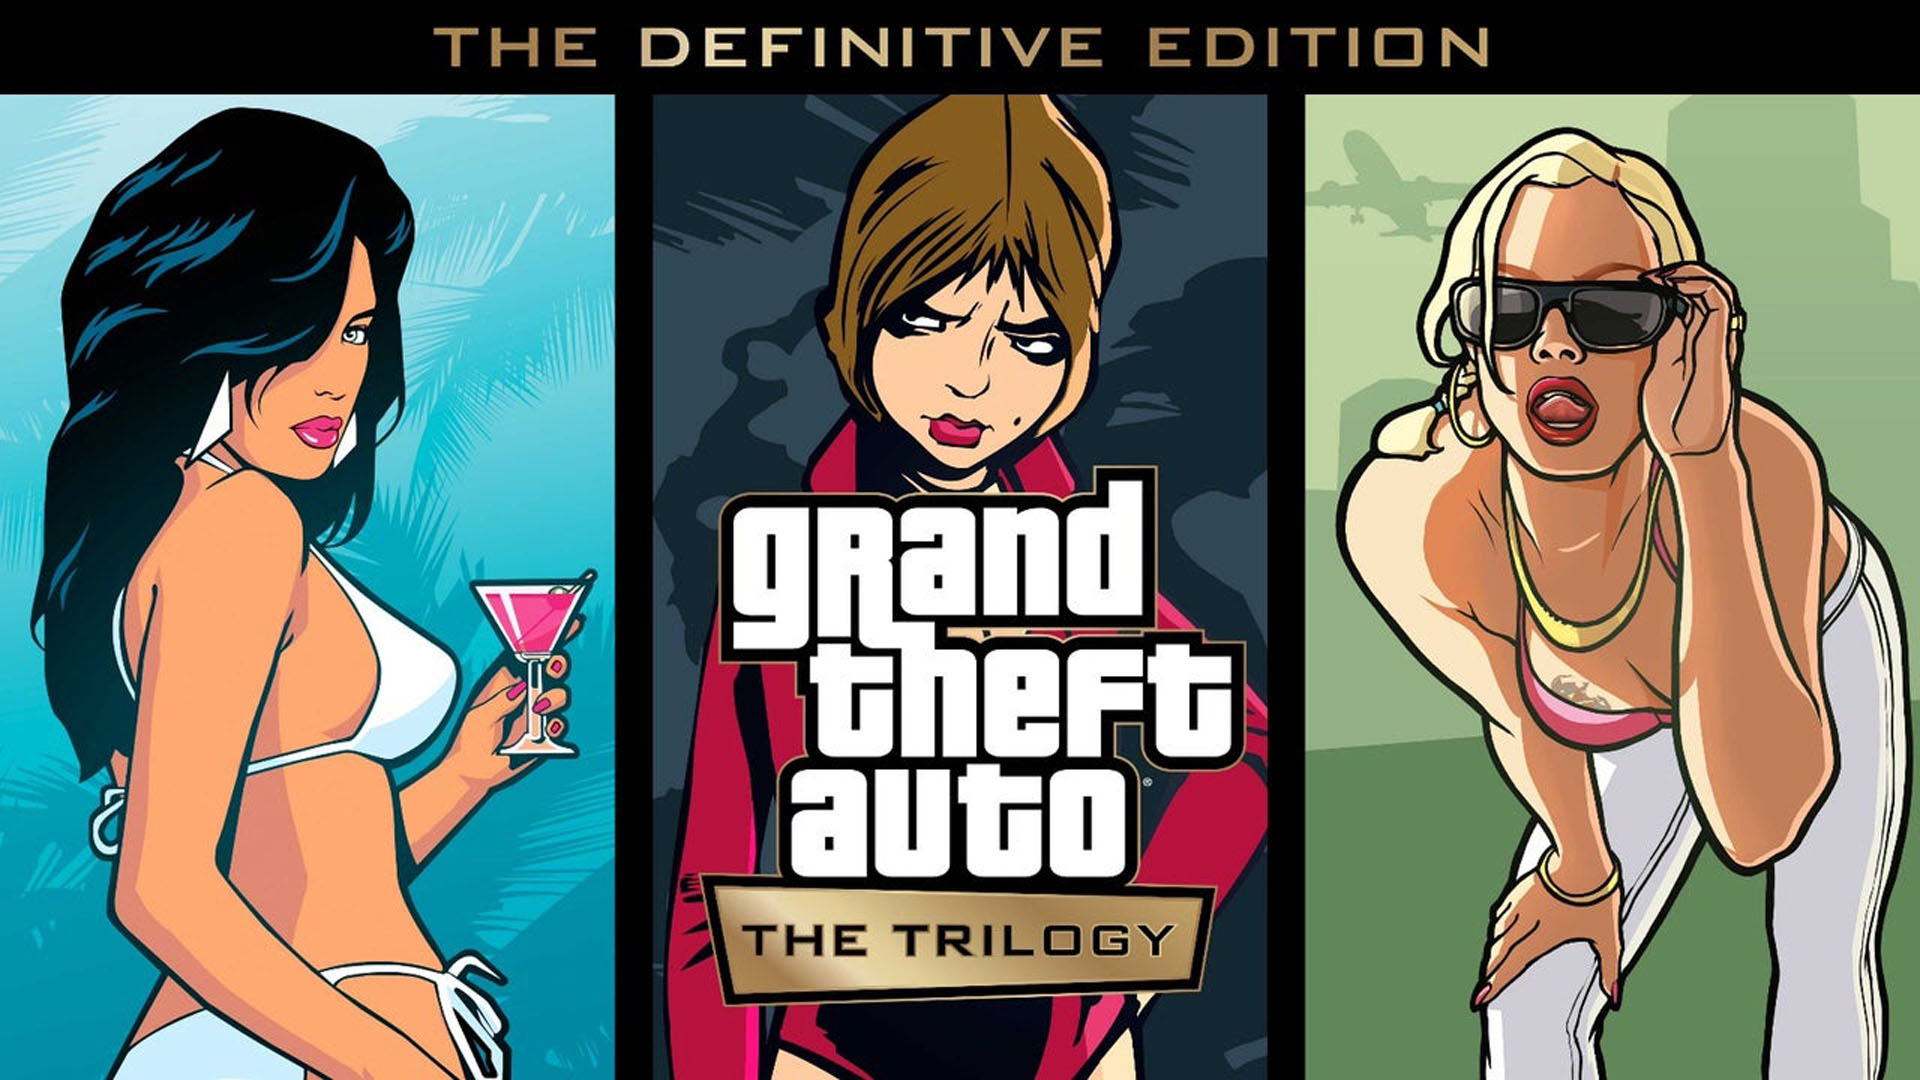 Grand Theft Auto: The Trilogy – Definitive Edition Preload Begins